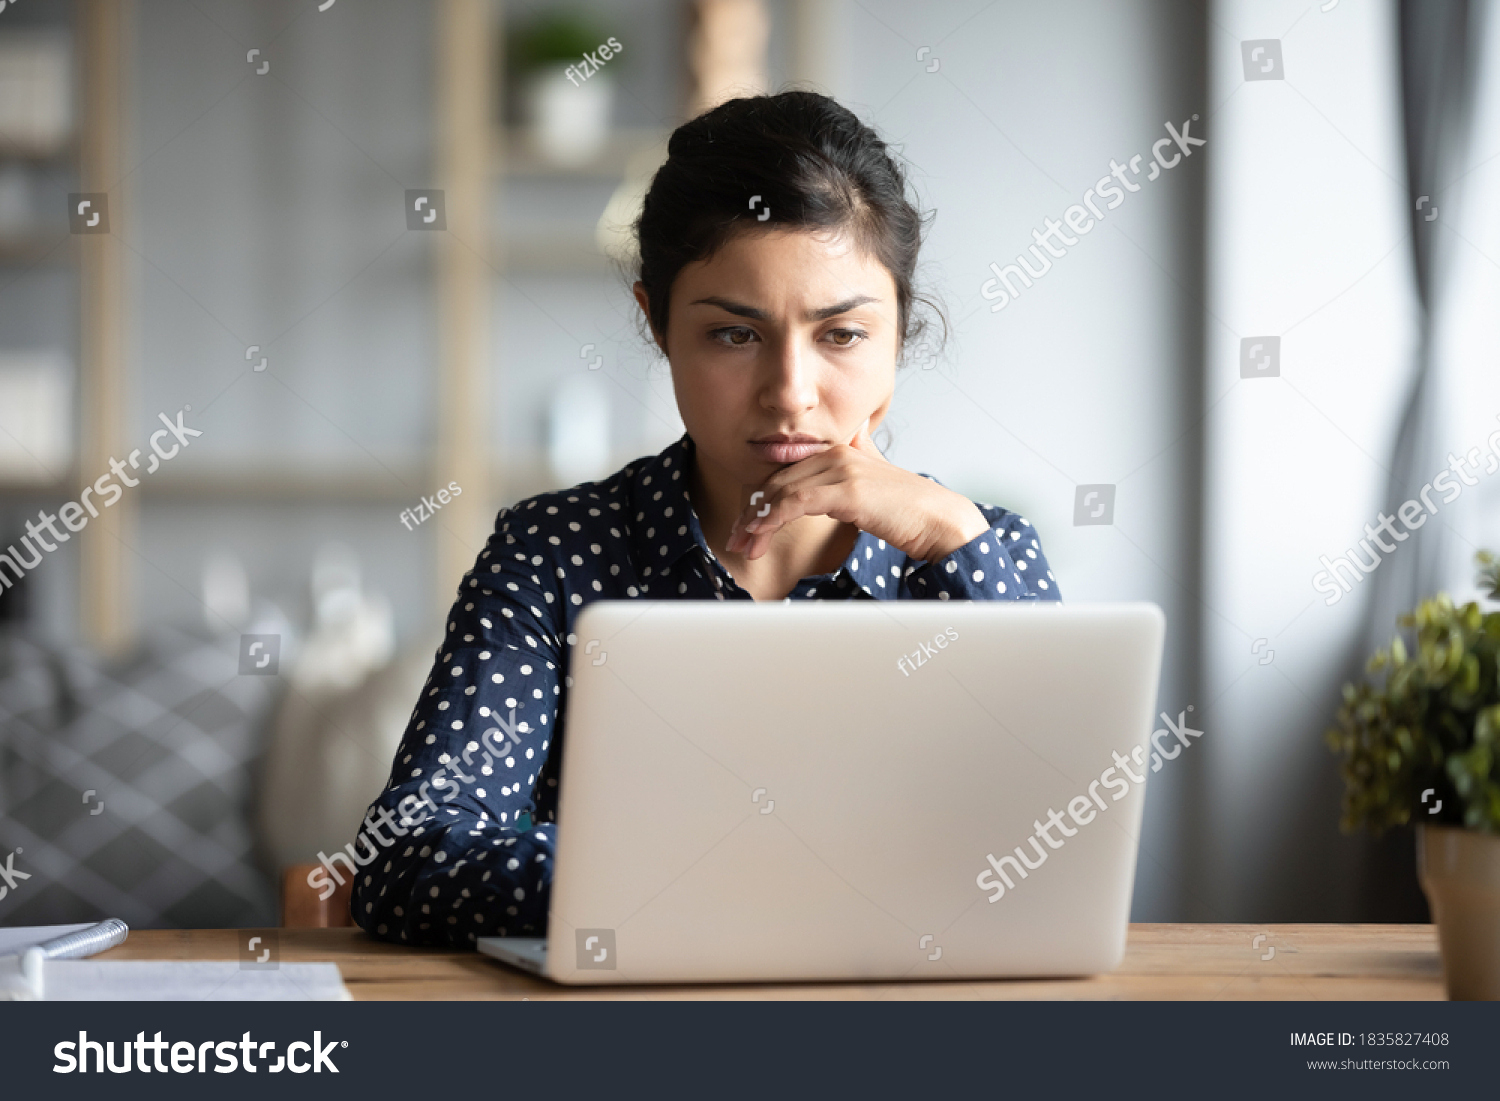 Serious frowning indian ethnicity woman sit at workplace desk looks at laptop screen read e-mail feels concerned. Bored unmotivated tired employee, problems difficulties with app understanding concept #1835827408